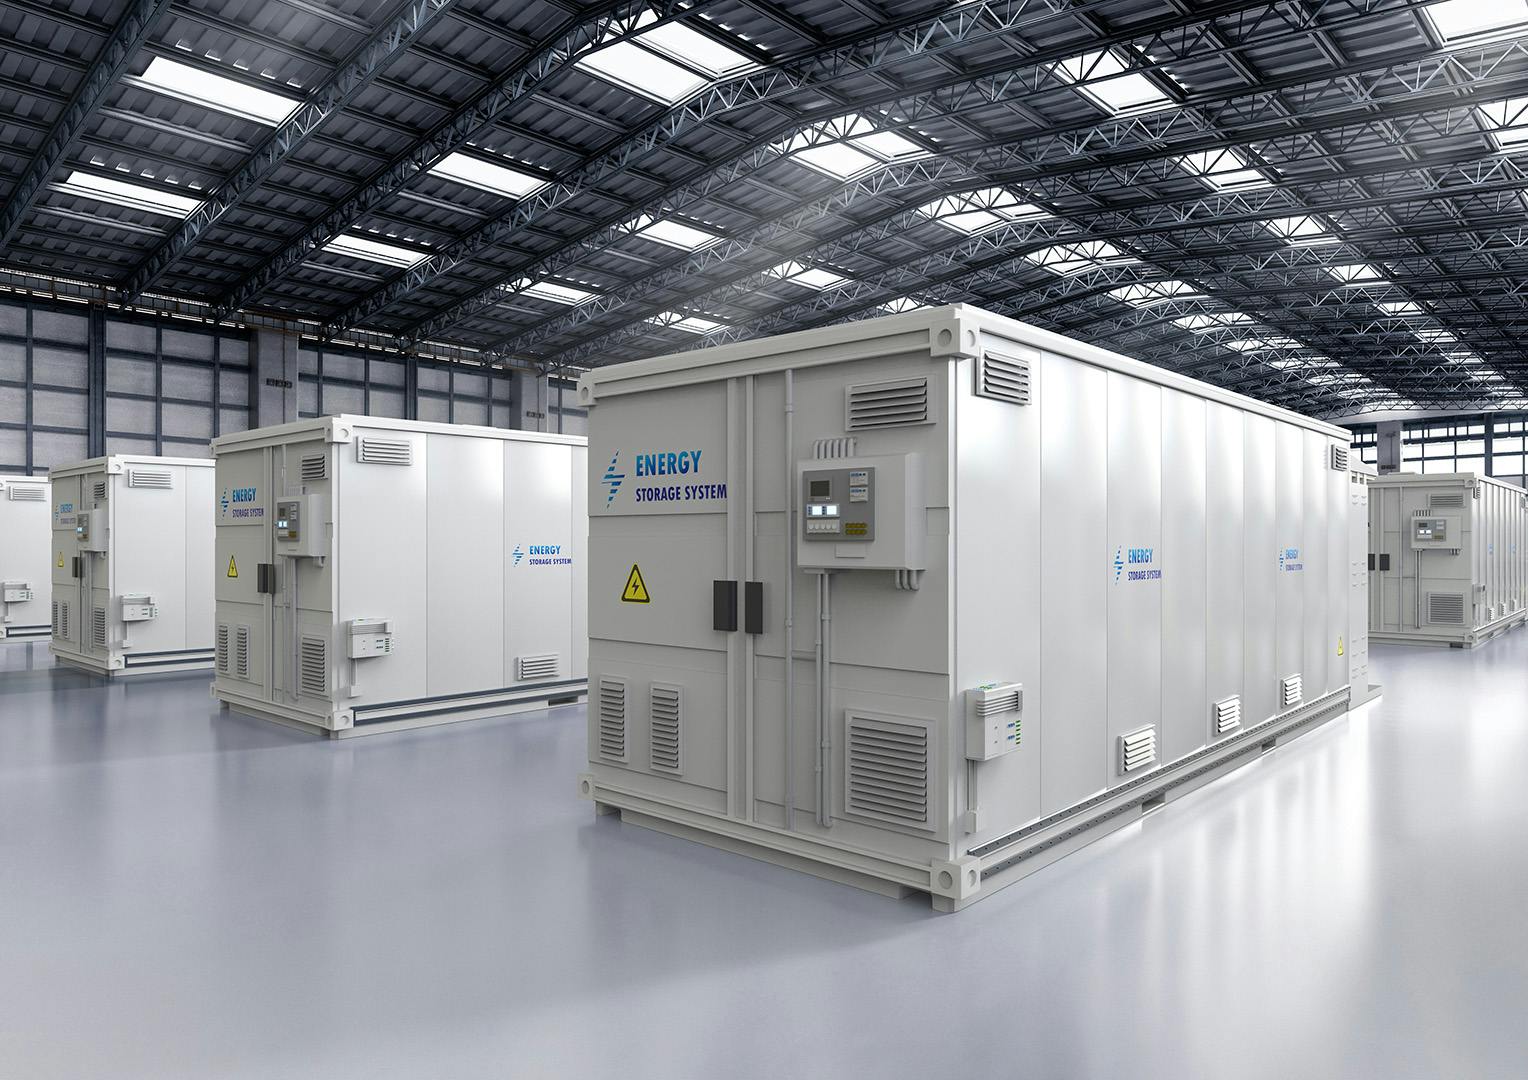 Energy storage containers sitting inside a warehousing space